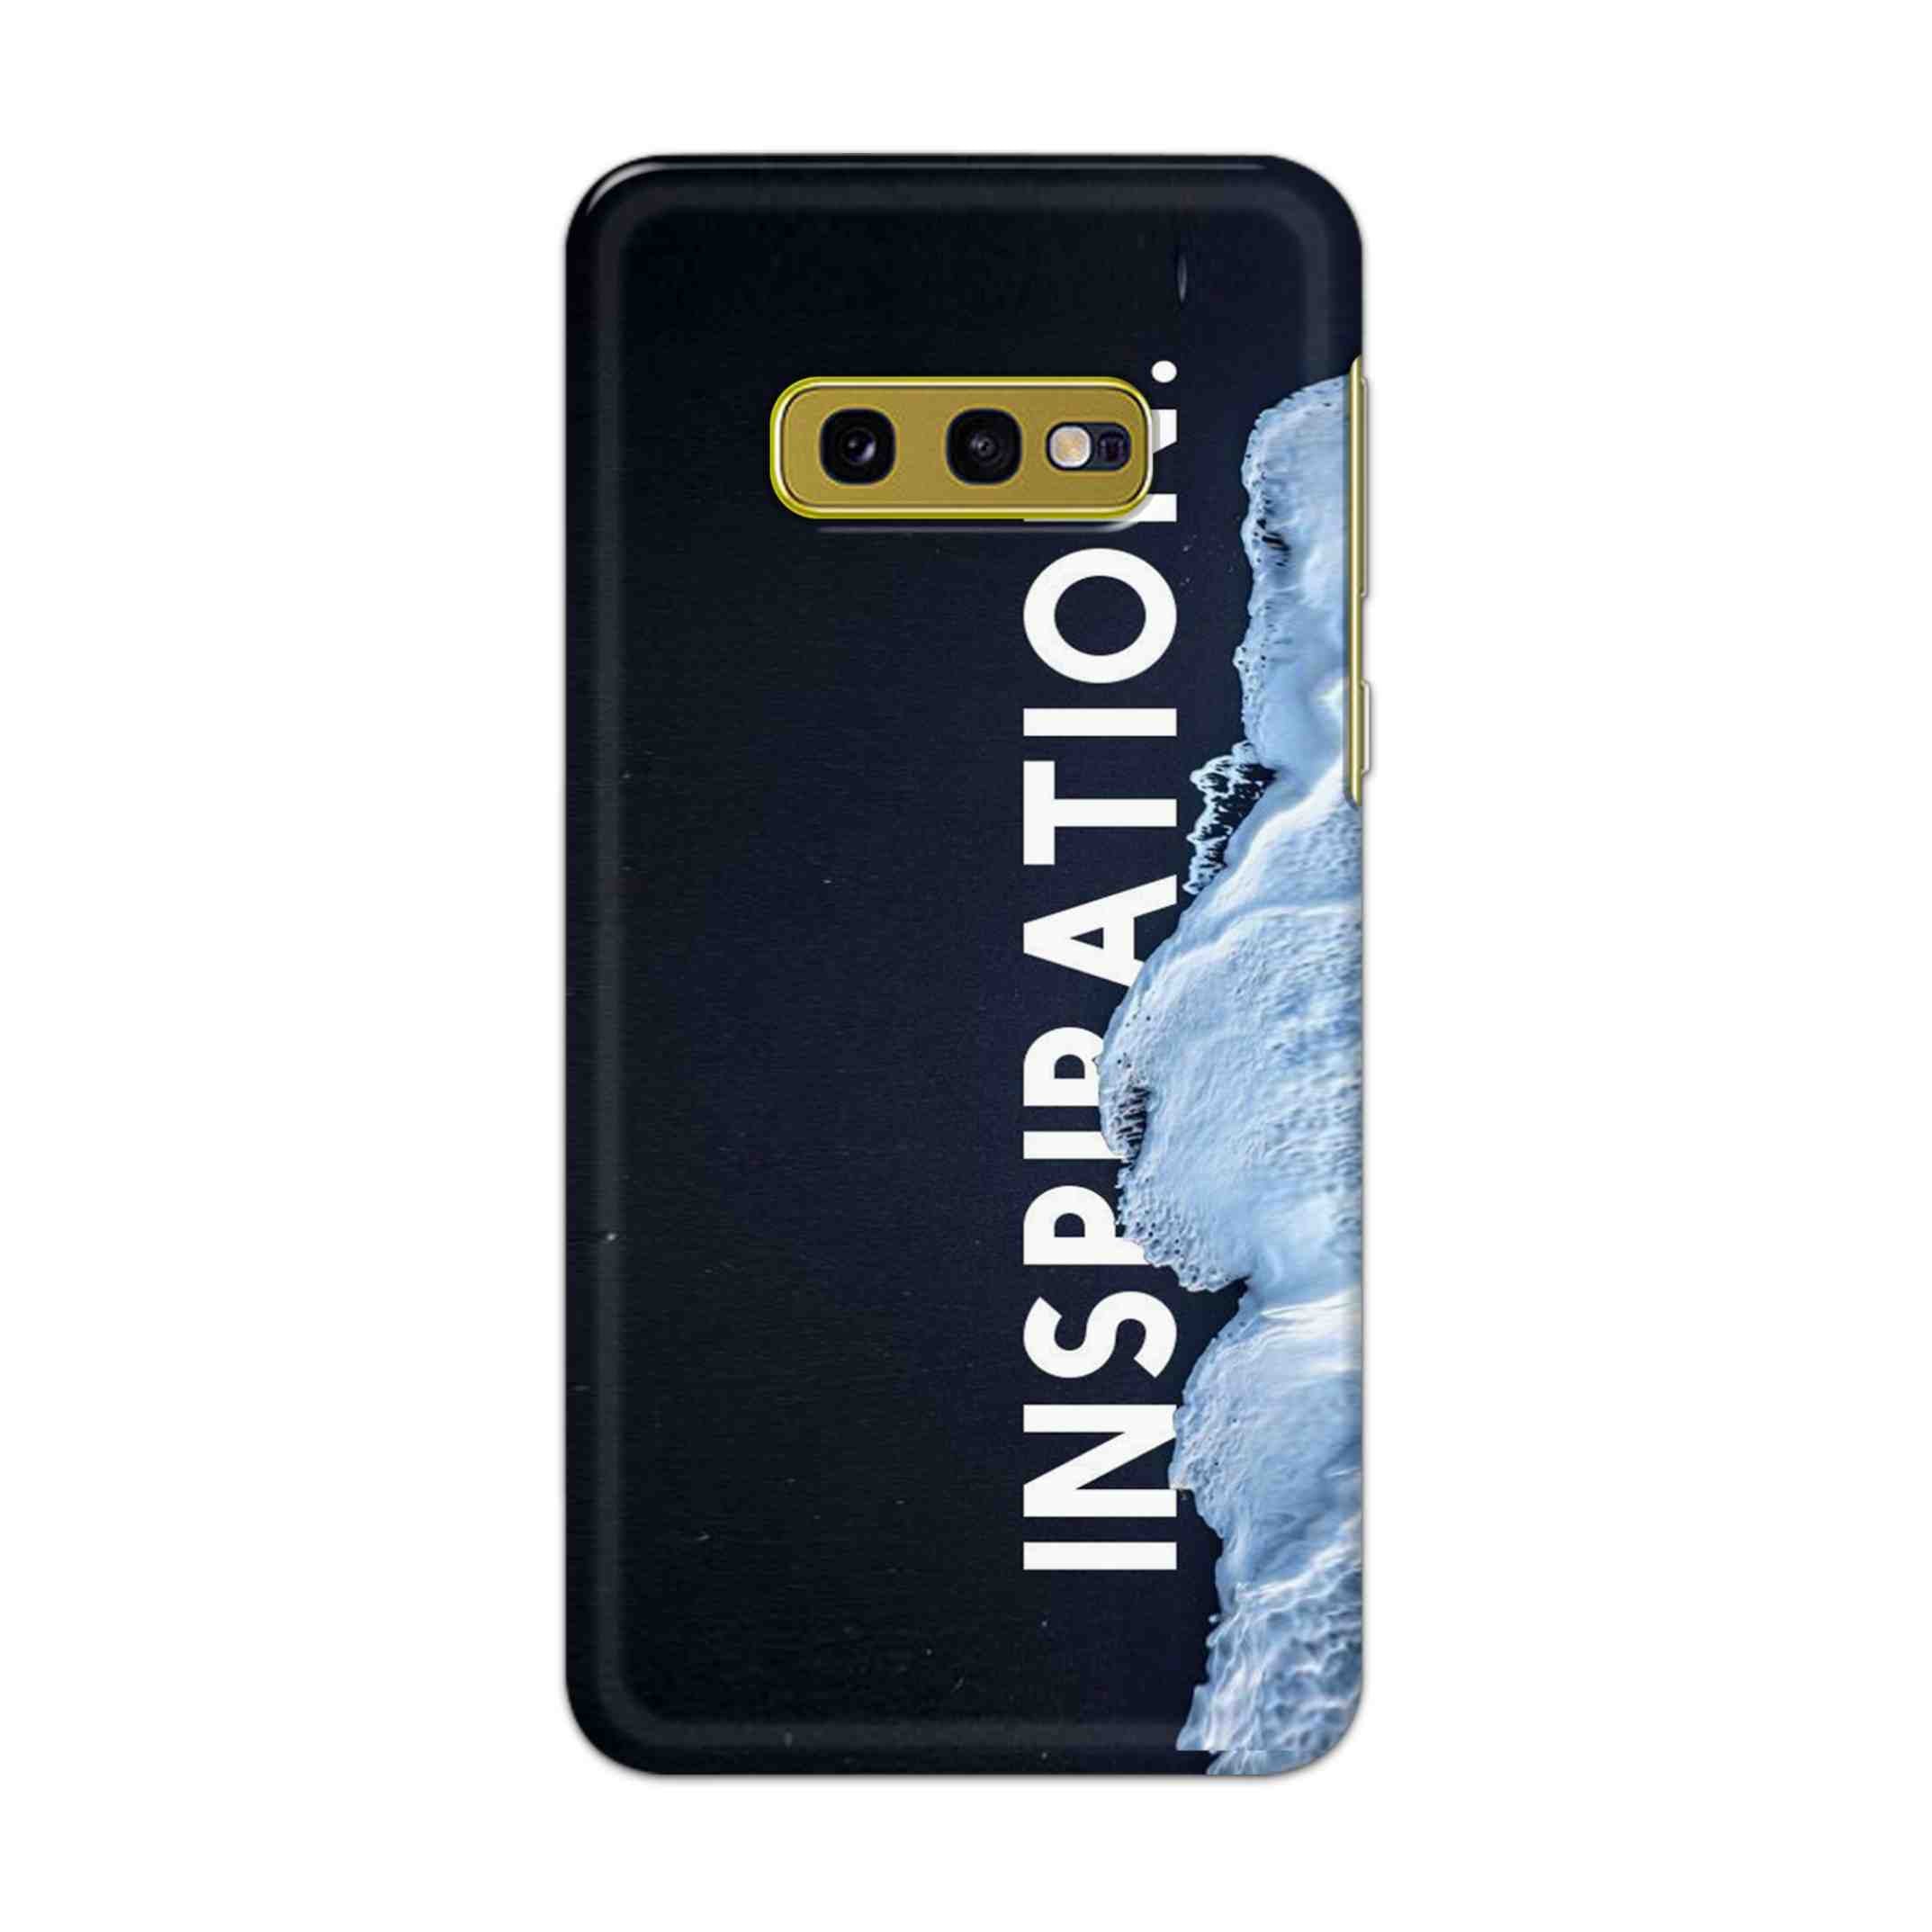 Buy Inspiration Hard Back Mobile Phone Case Cover For Samsung Galaxy S10e Online